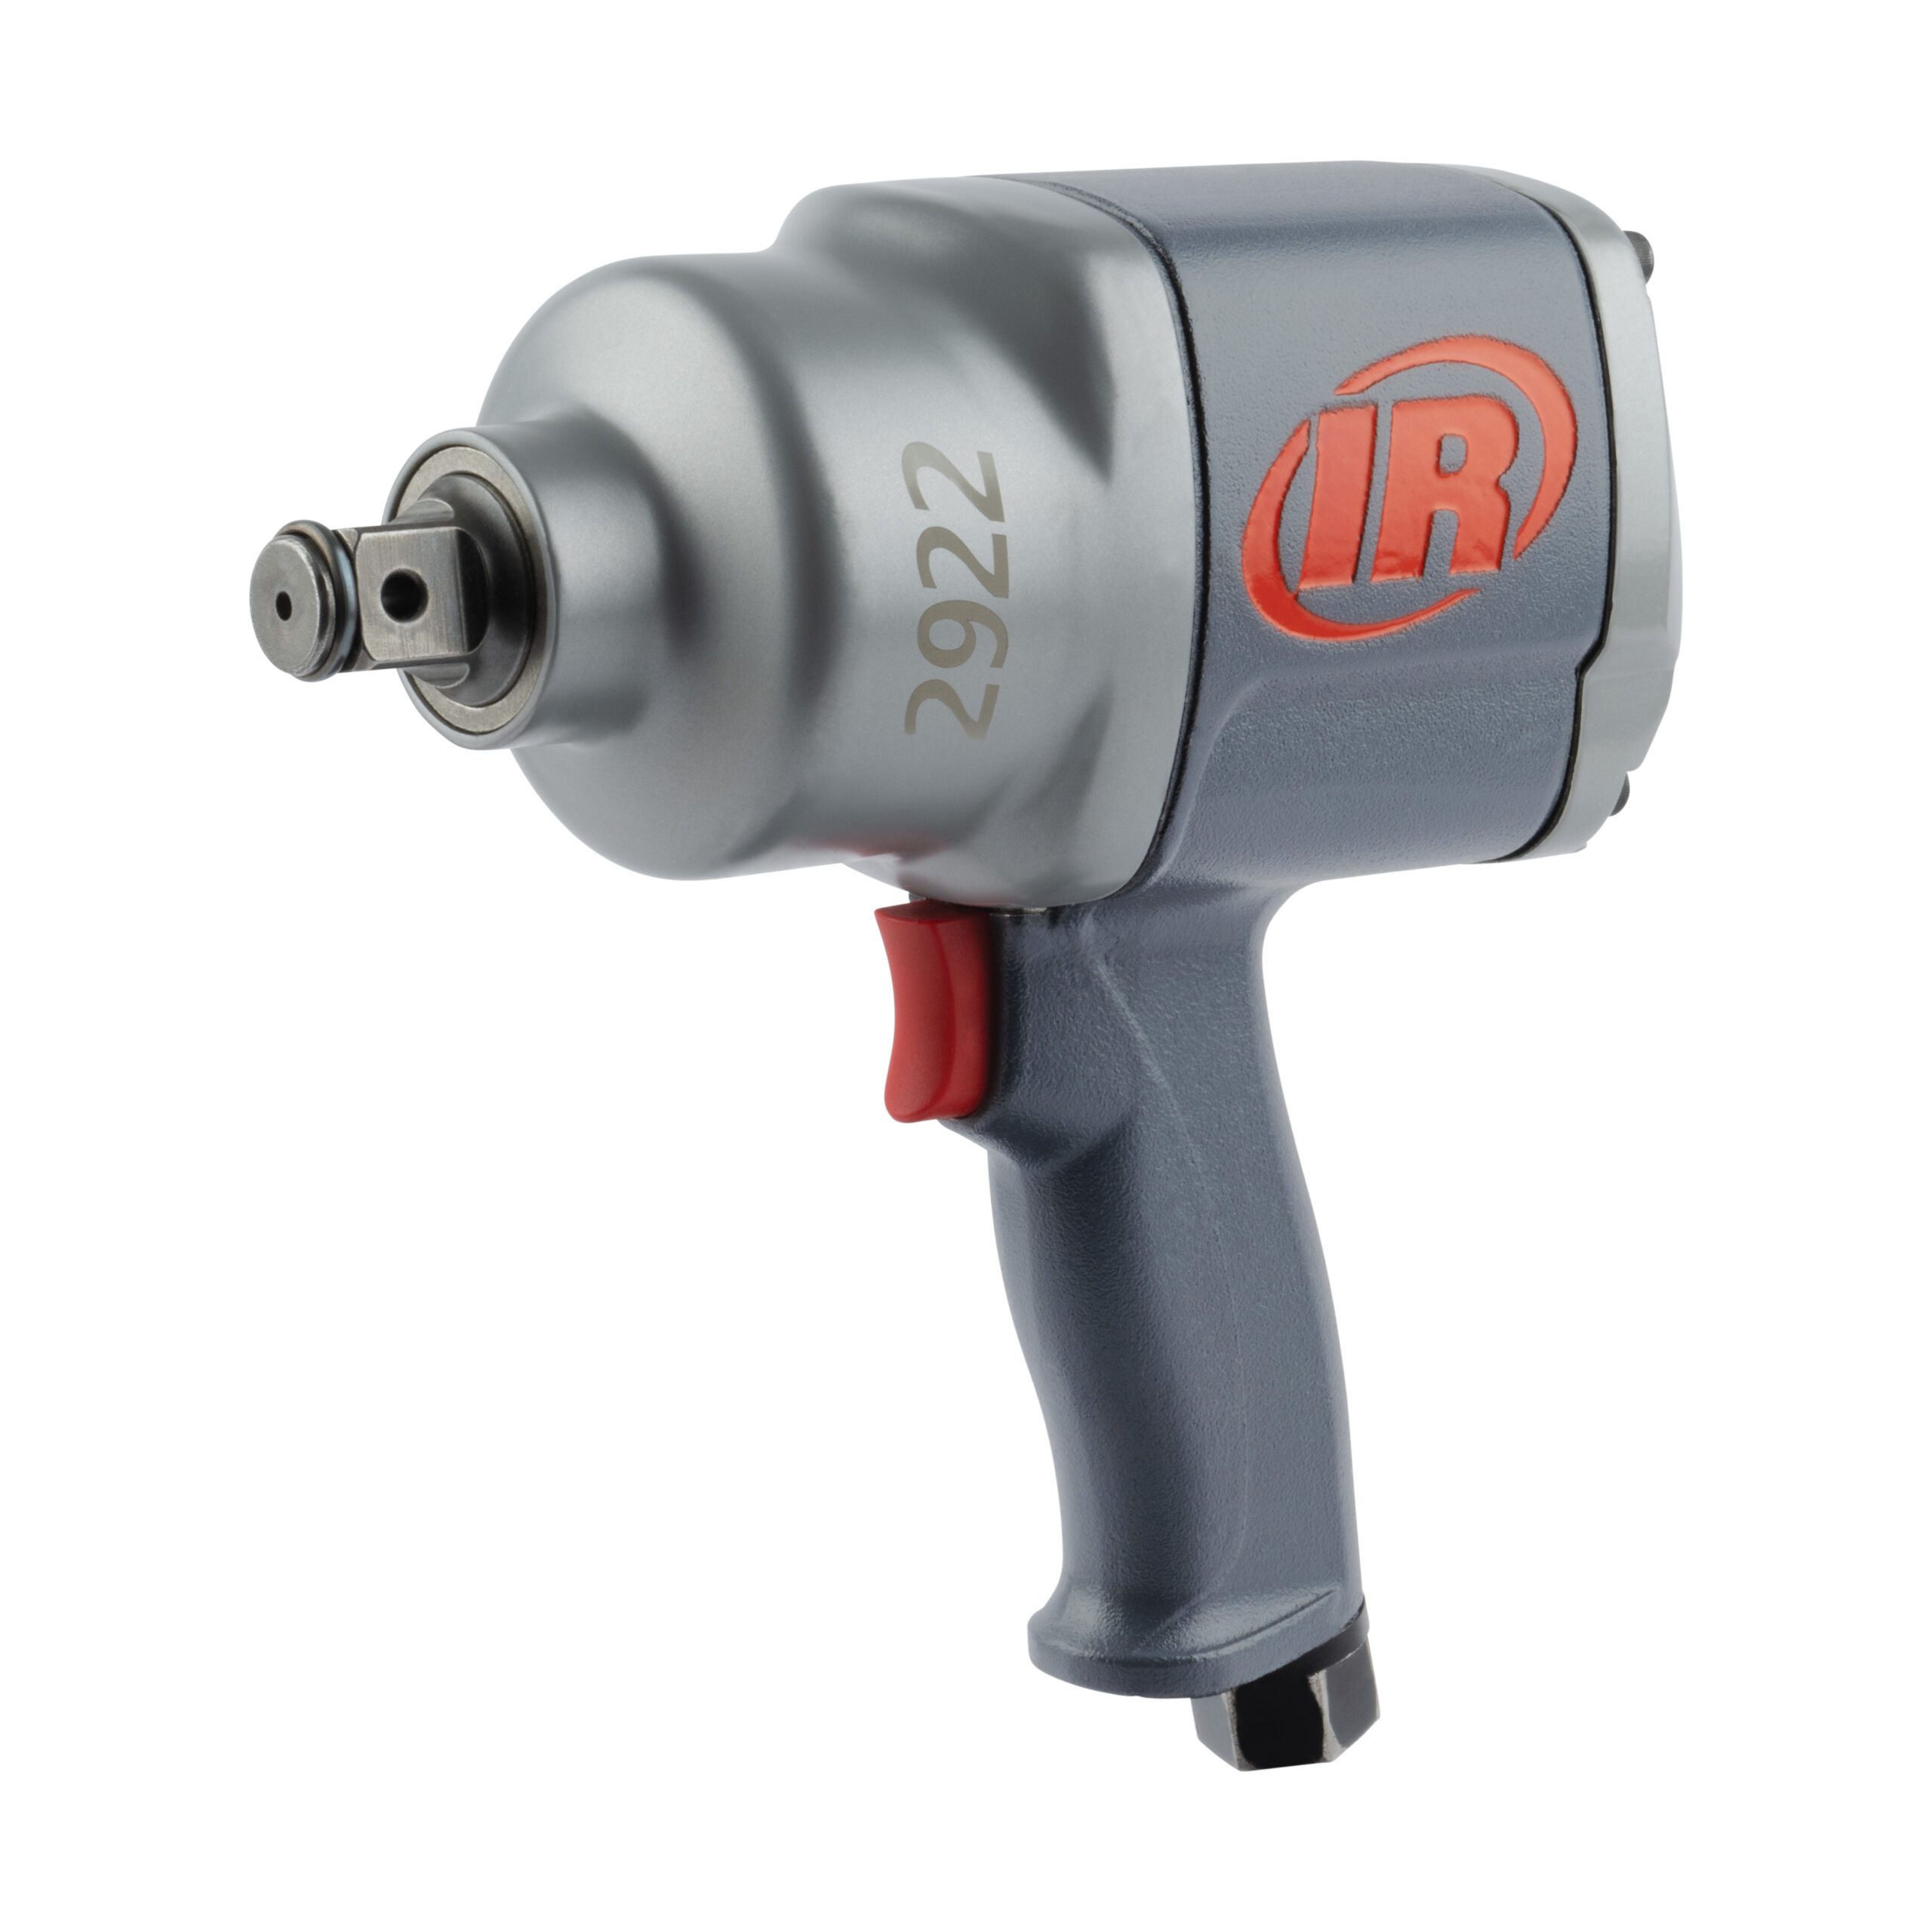 Ingersoll Rand® 2922 Series Pneumatic Impact Wrenches Combine